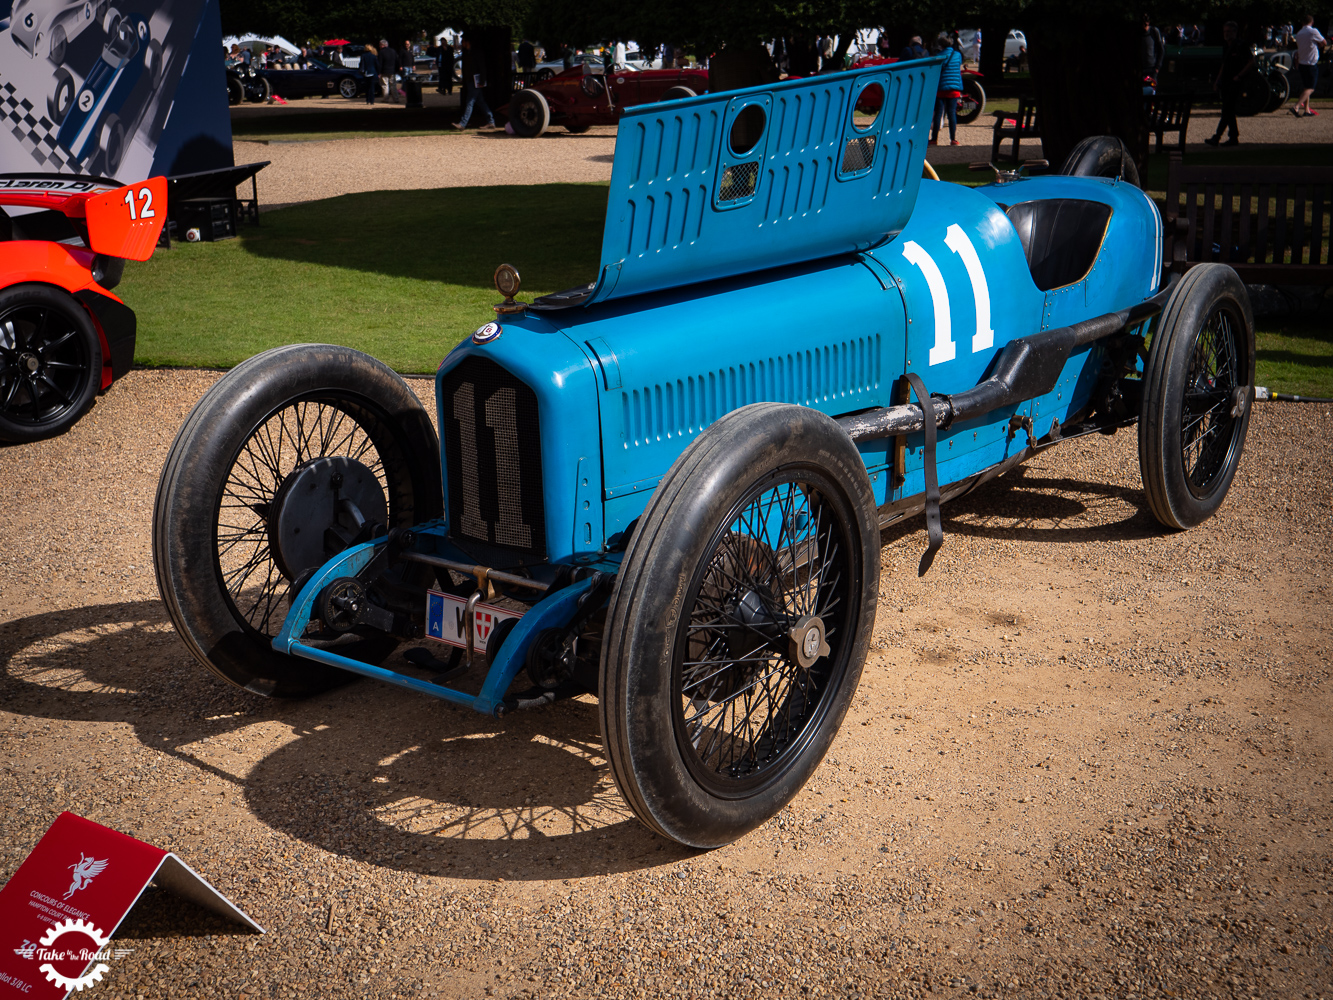 Concours of Elegance Hampton Court Palace Highlights 2019